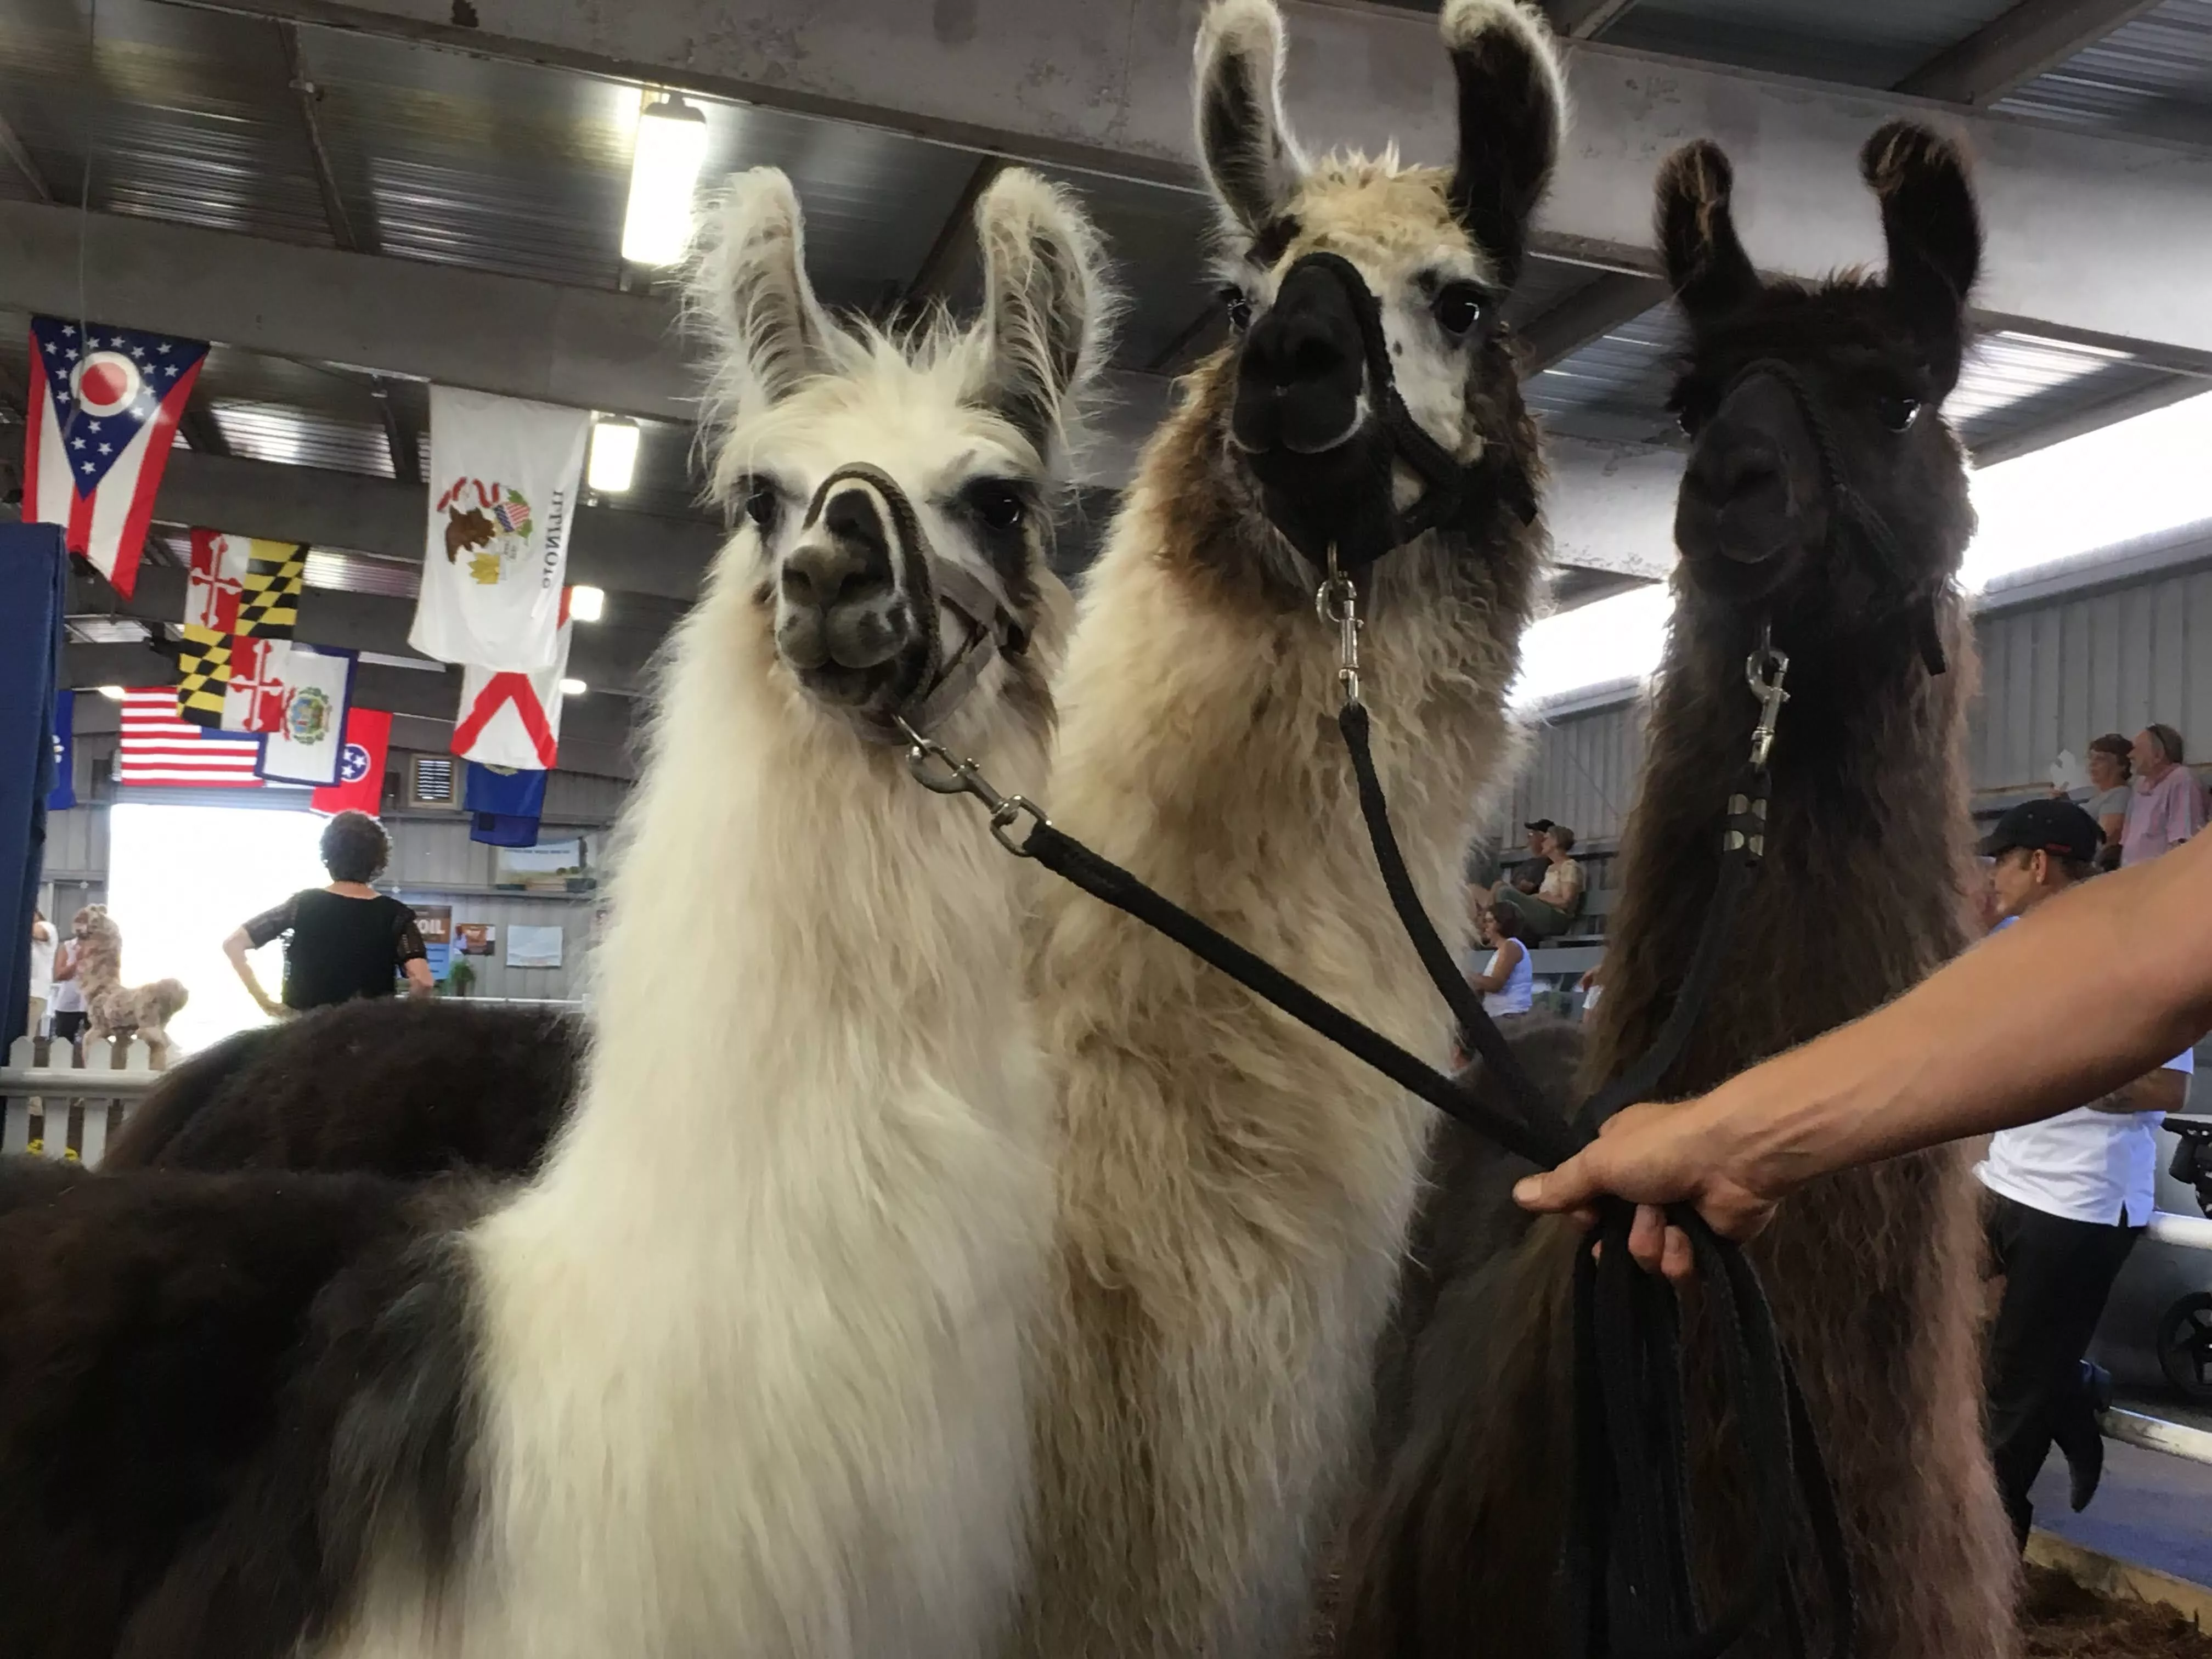 Three llamas at a show at the West Virginia State Fairgrounds